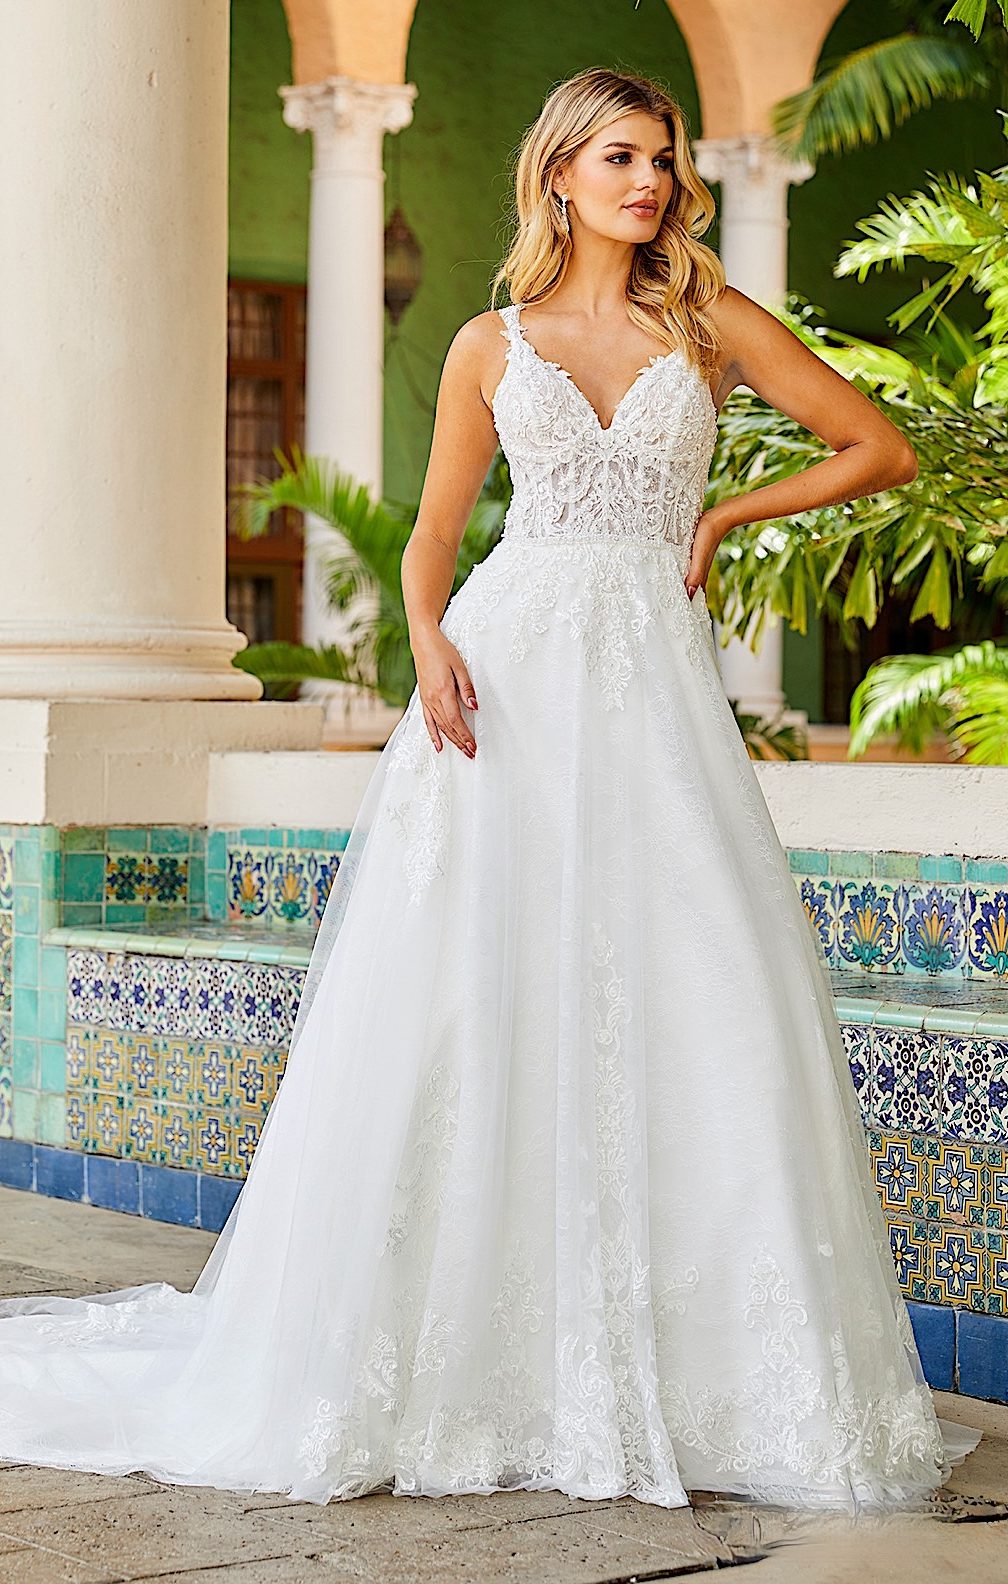 Modest 2020 African Princess Long Sleeve Wedding Gown With Long Sleeves,  Ball Gown Style, And Long Veil Perfect For Muslim Brides In Nigeria From  Hellobuyerh, $152.77 | DHgate.Com